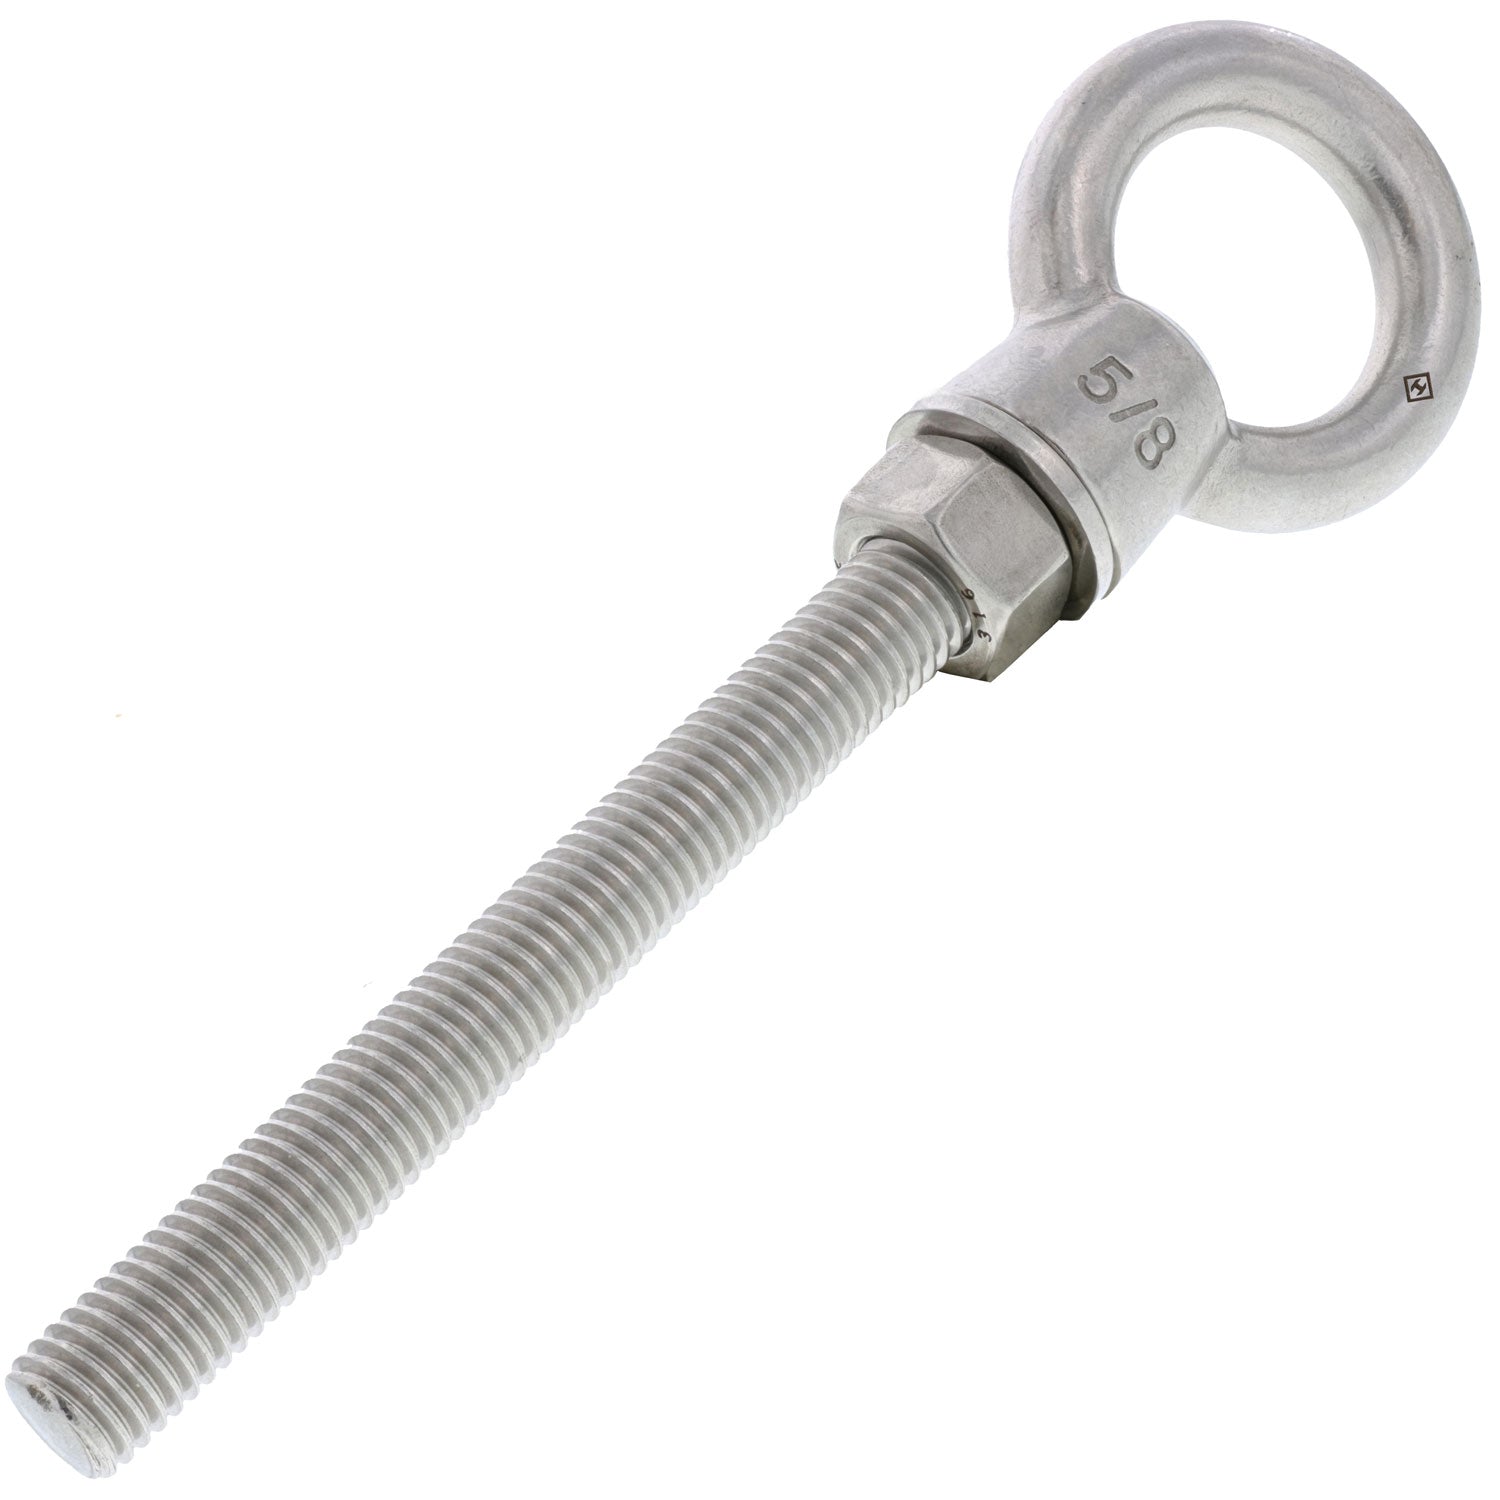 5 Pcs Forged Eye Bolt Quality Stainless Steel Stable Use 